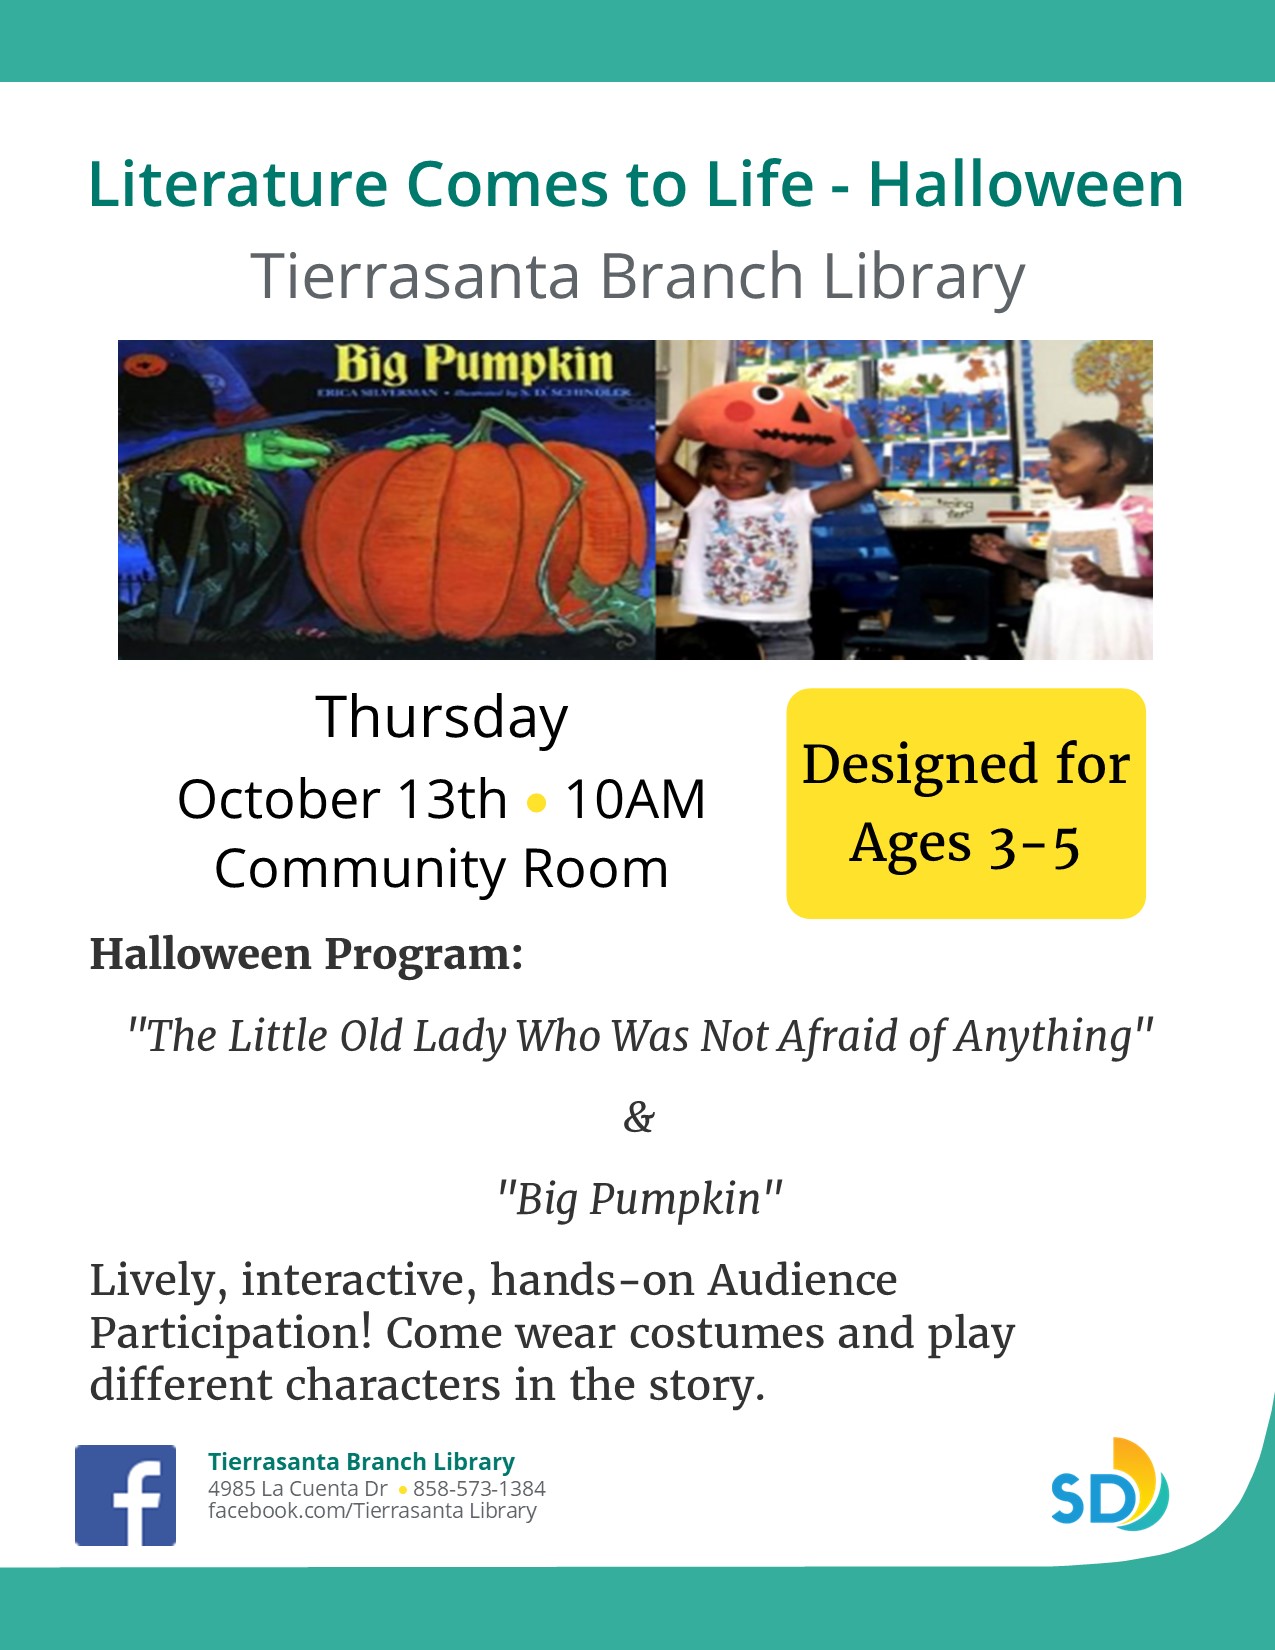 flyer with a cartoon pumpkin and children in costumes